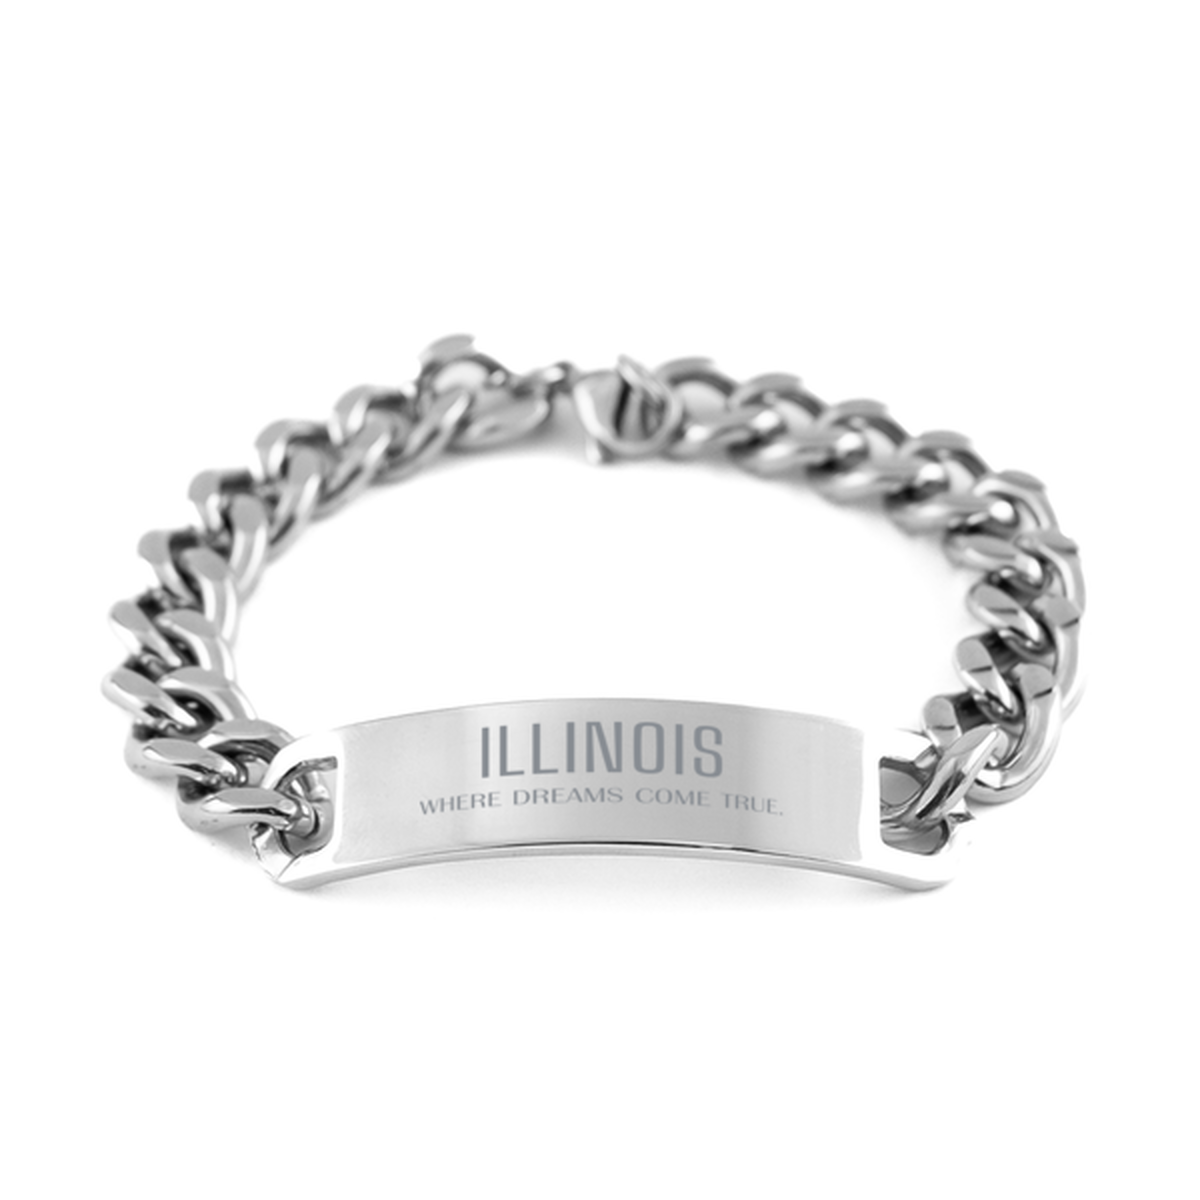 Love Illinois State Cuban Chain Stainless Steel Bracelet, Illinois Where dreams come true, Birthday Inspirational Gifts For Illinois Men, Women, Friends